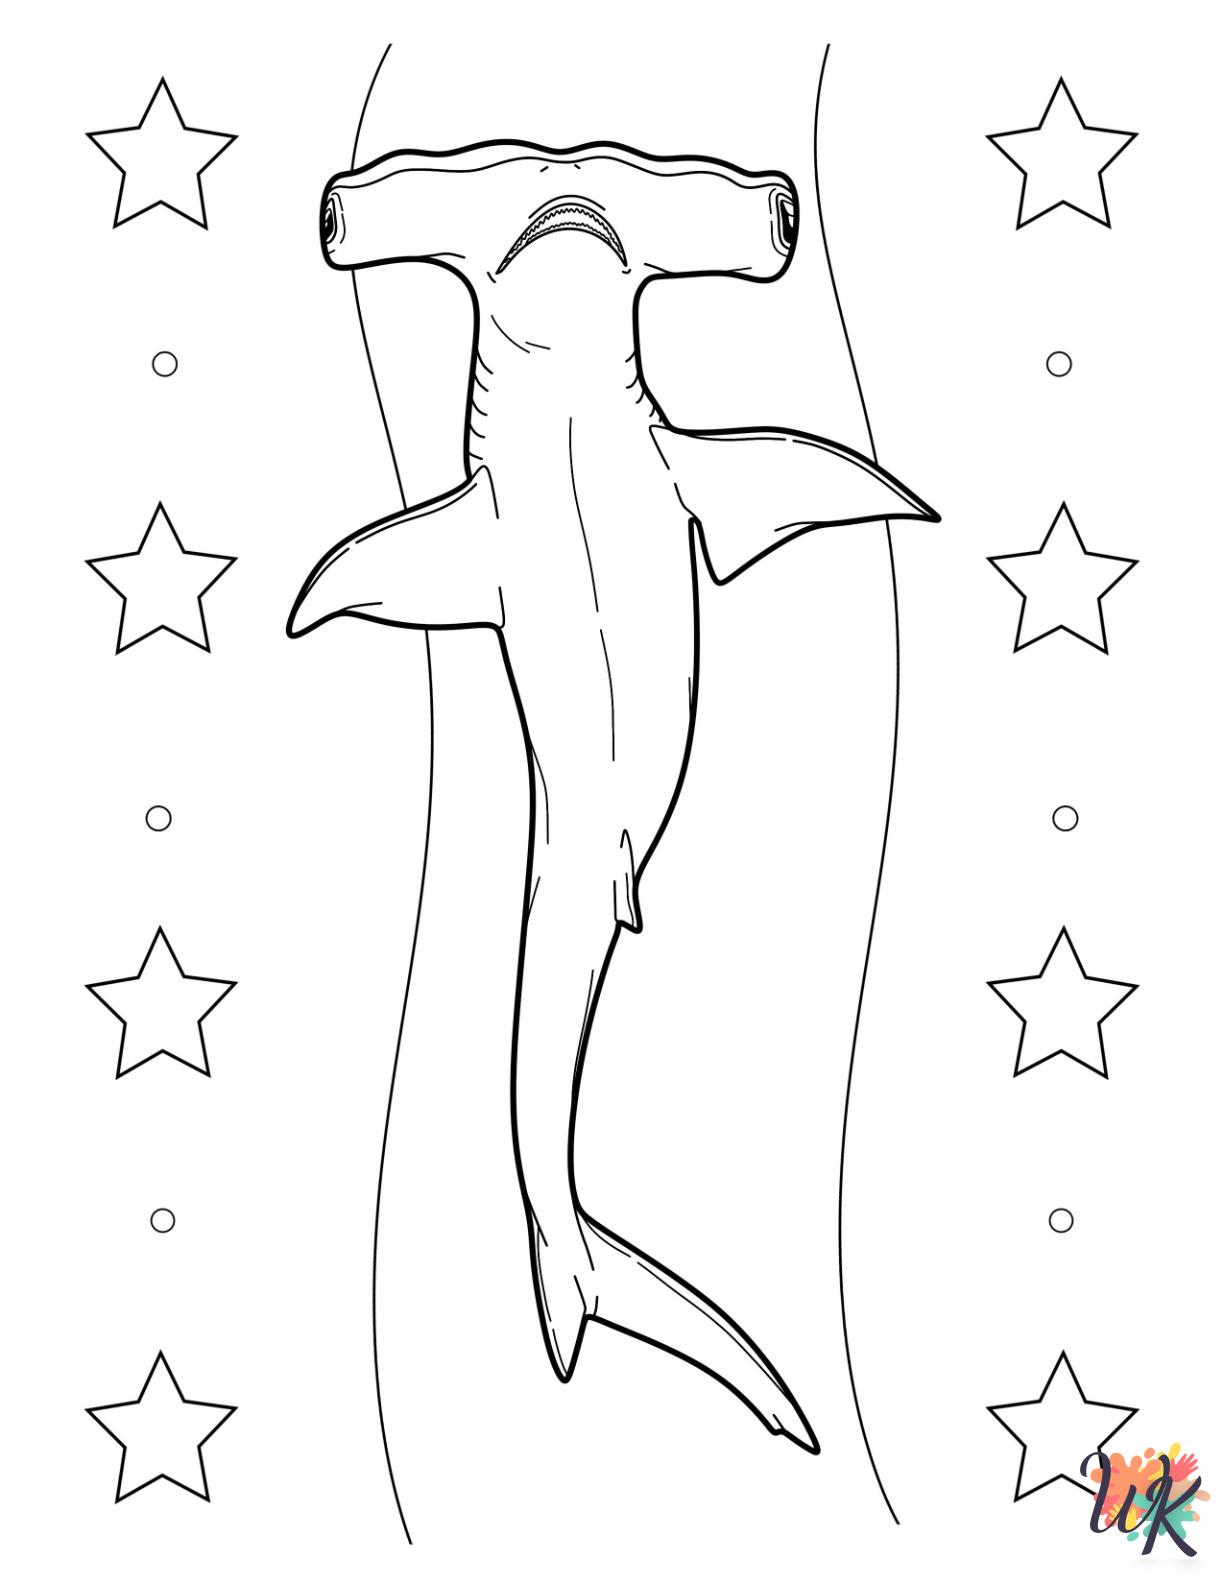 Hammerhead Shark coloring pages easy